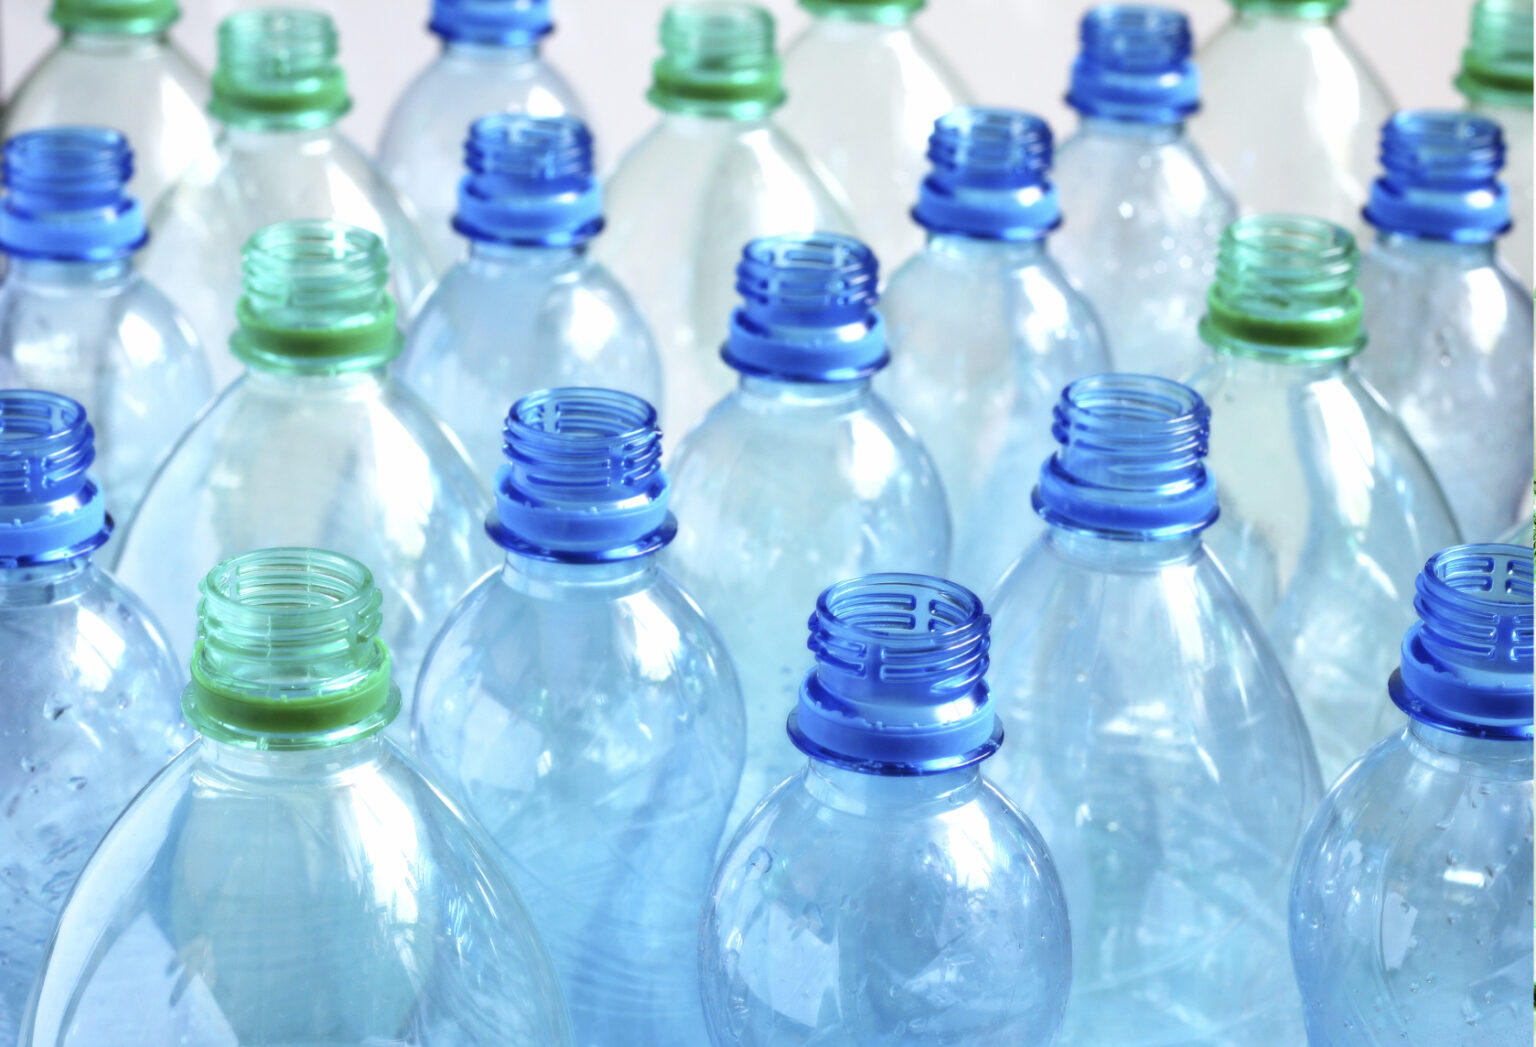 Blue And Green Plastic Bottles1 1536x1047 